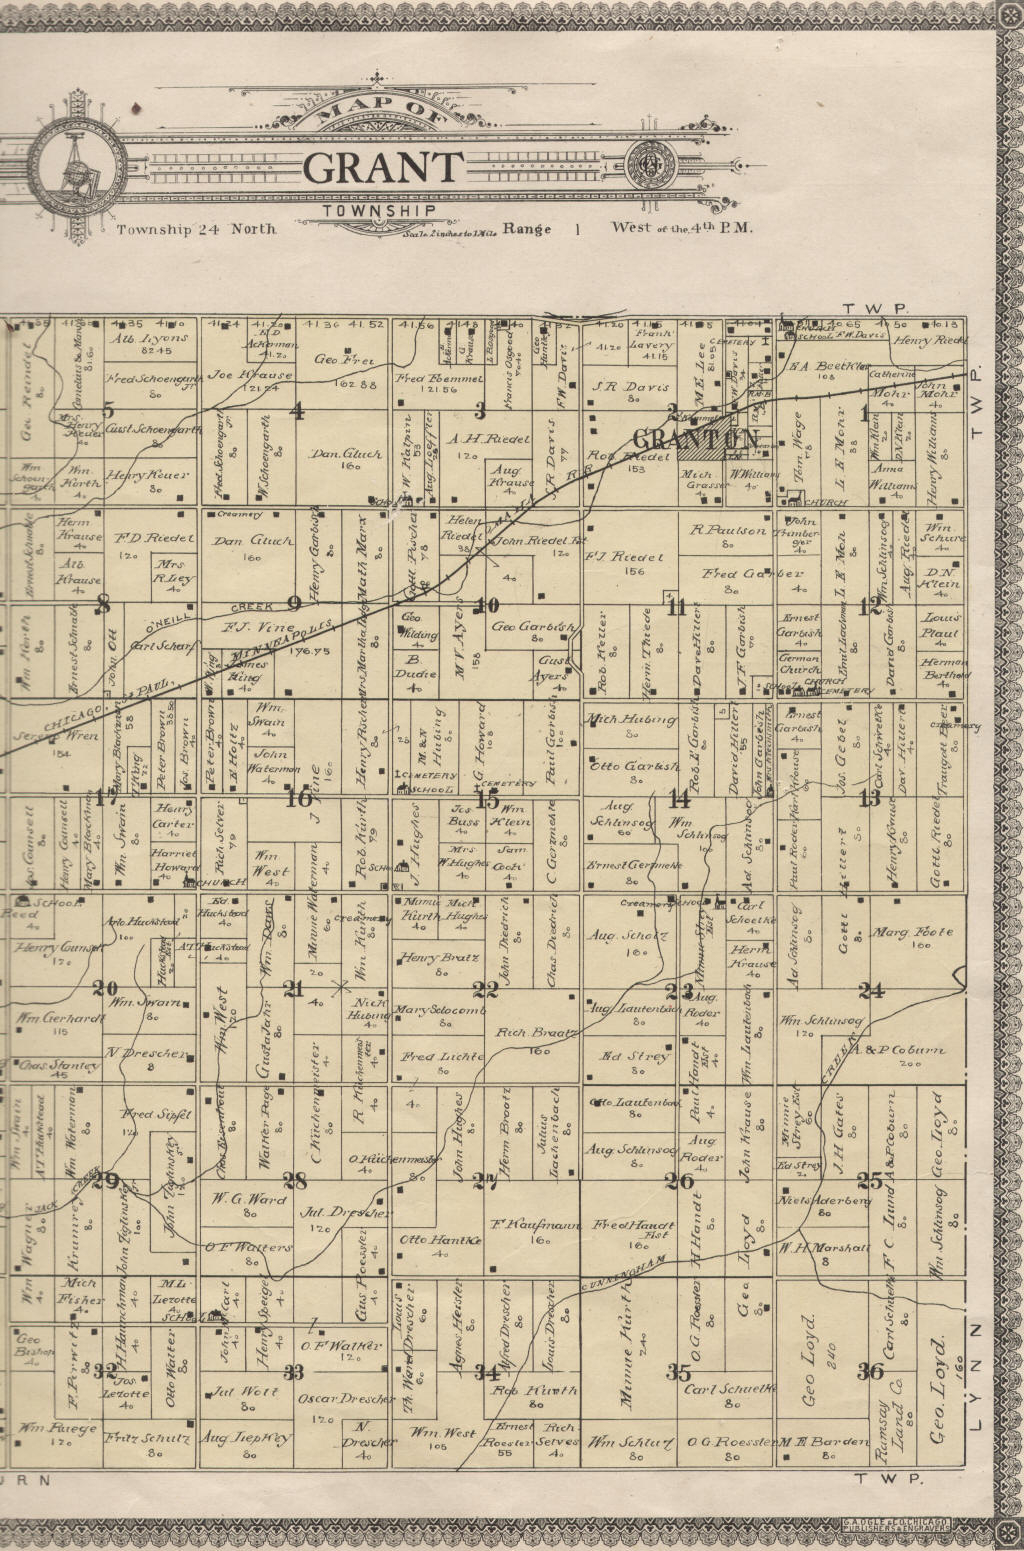 Index For Grant Township Plat Maps